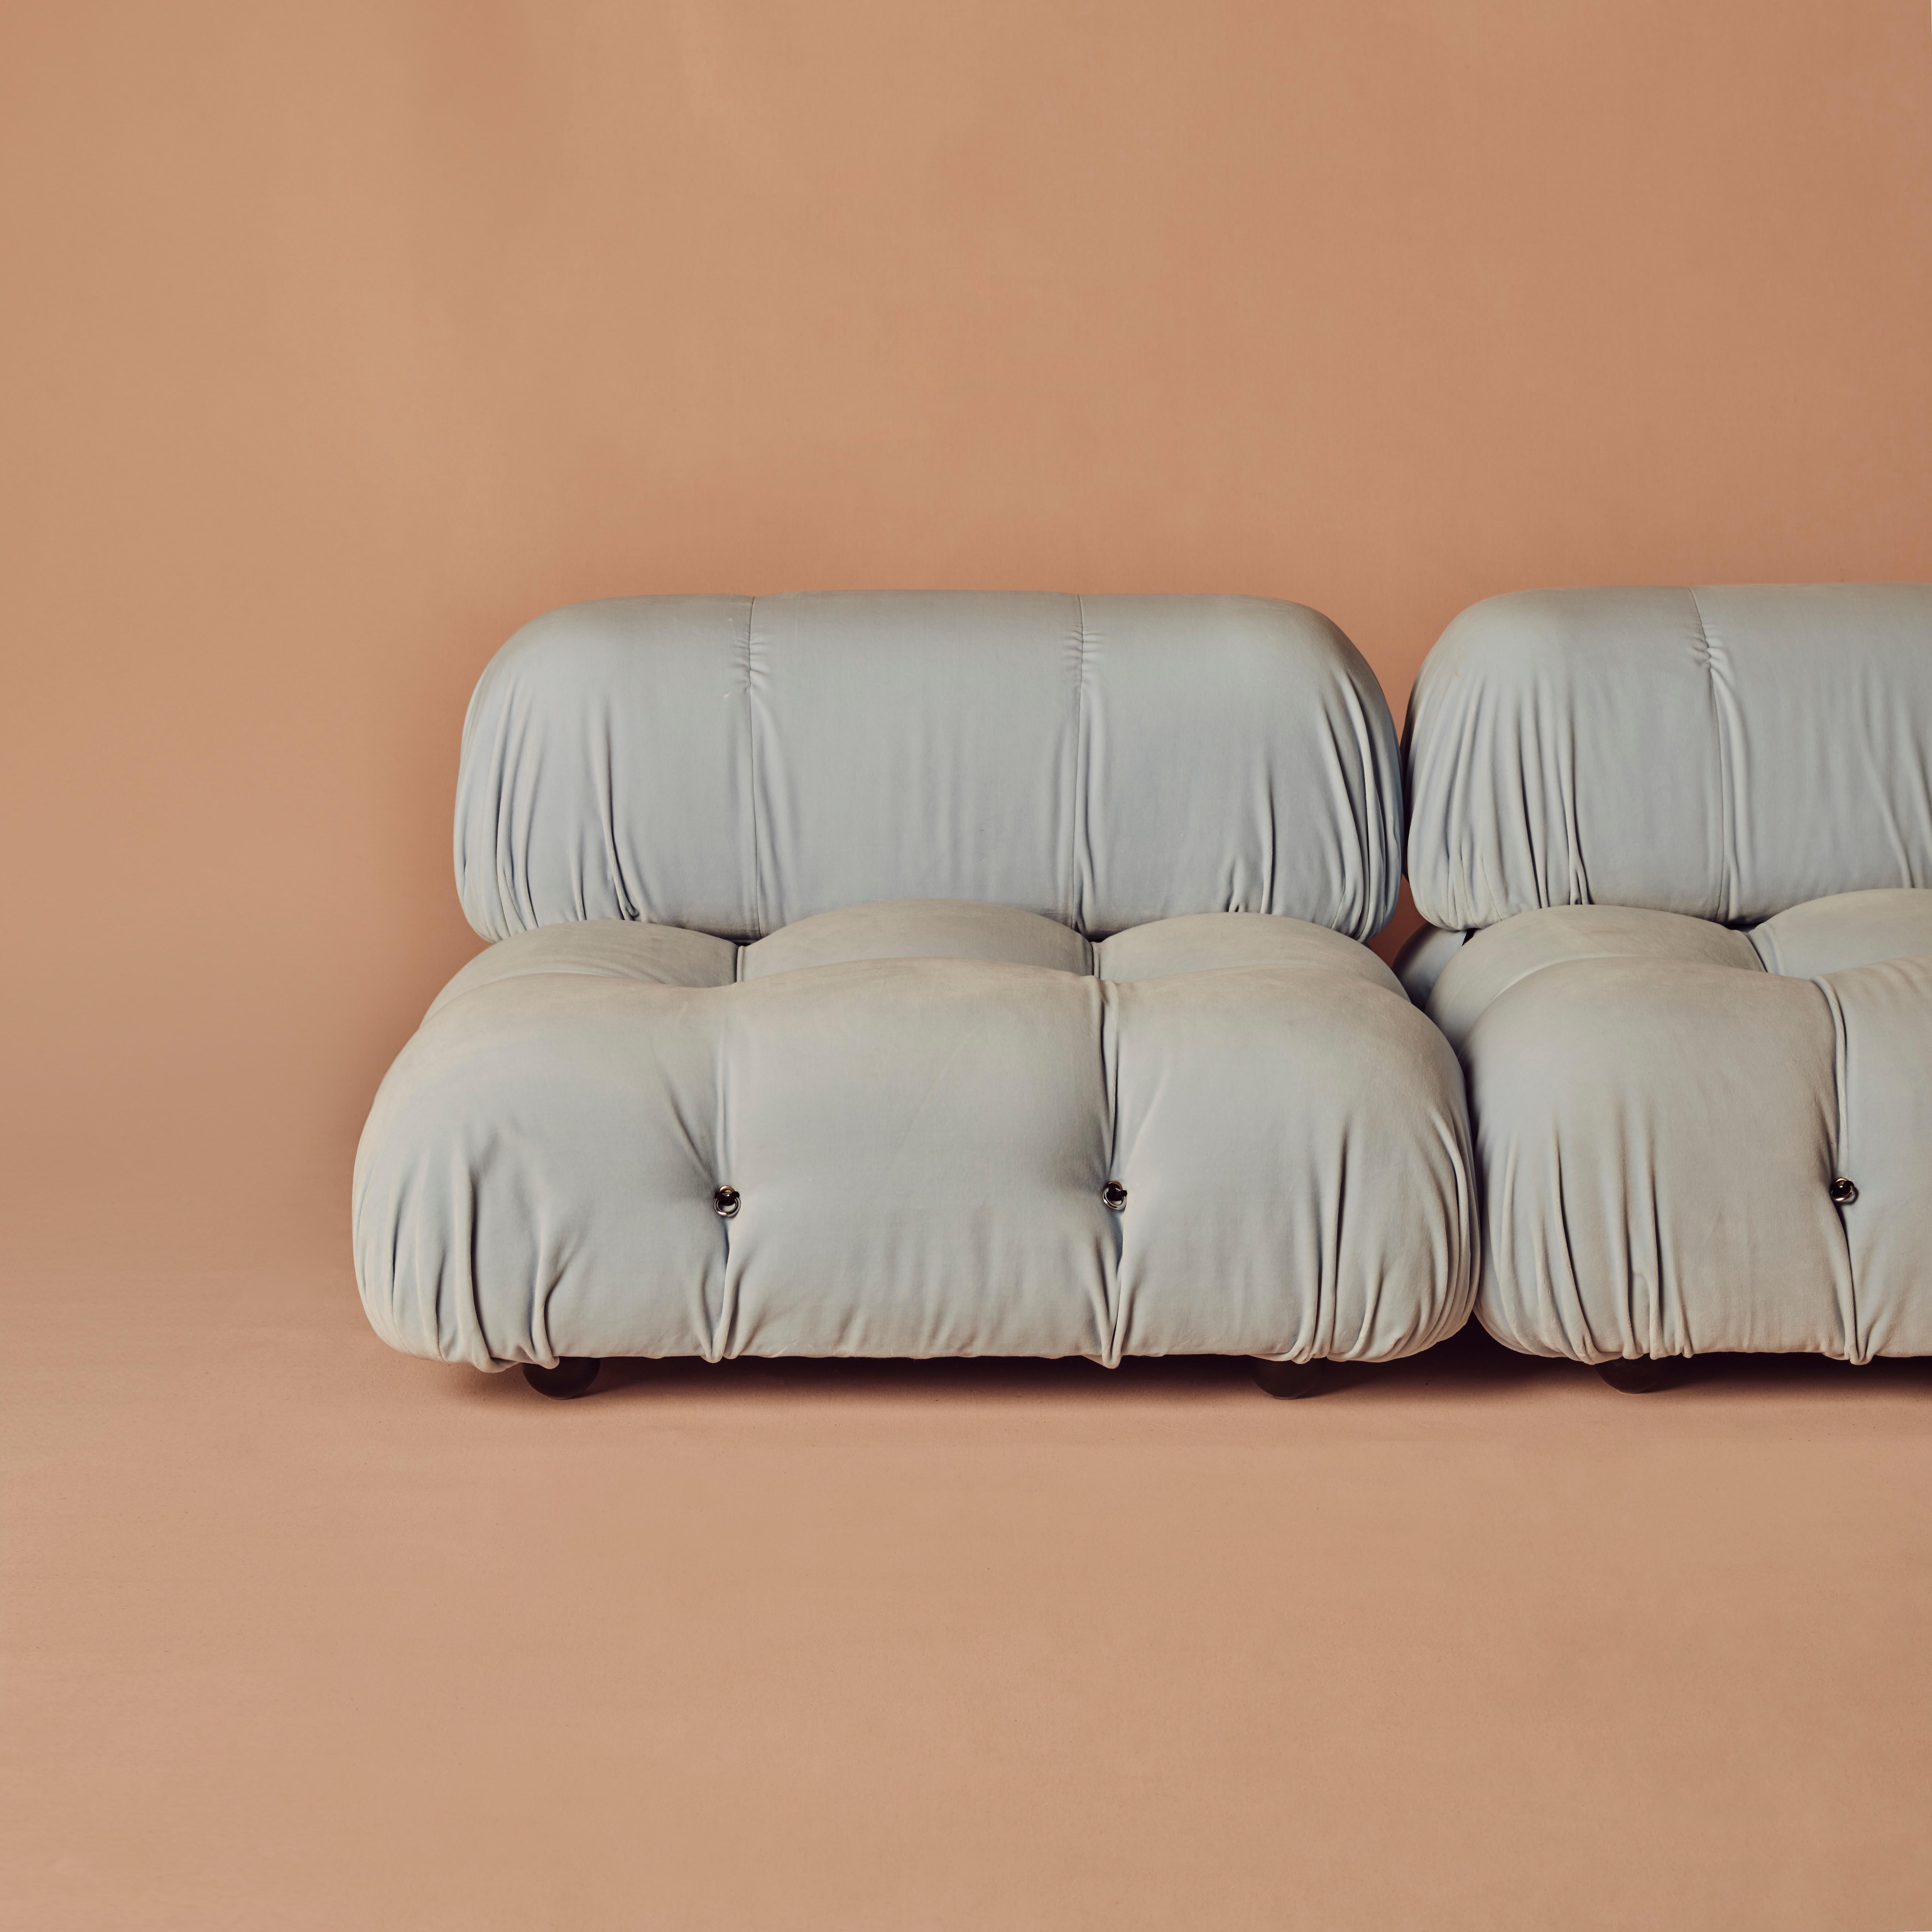 A classic Italian design upholstered in Sky Blue cotton velvet by Rose Uniacke, a lovely soft velvet. 

Modular in nature, this set of three large Camaleonda units can be arranged in any position, with adaptable backs, and a singular armrest. These